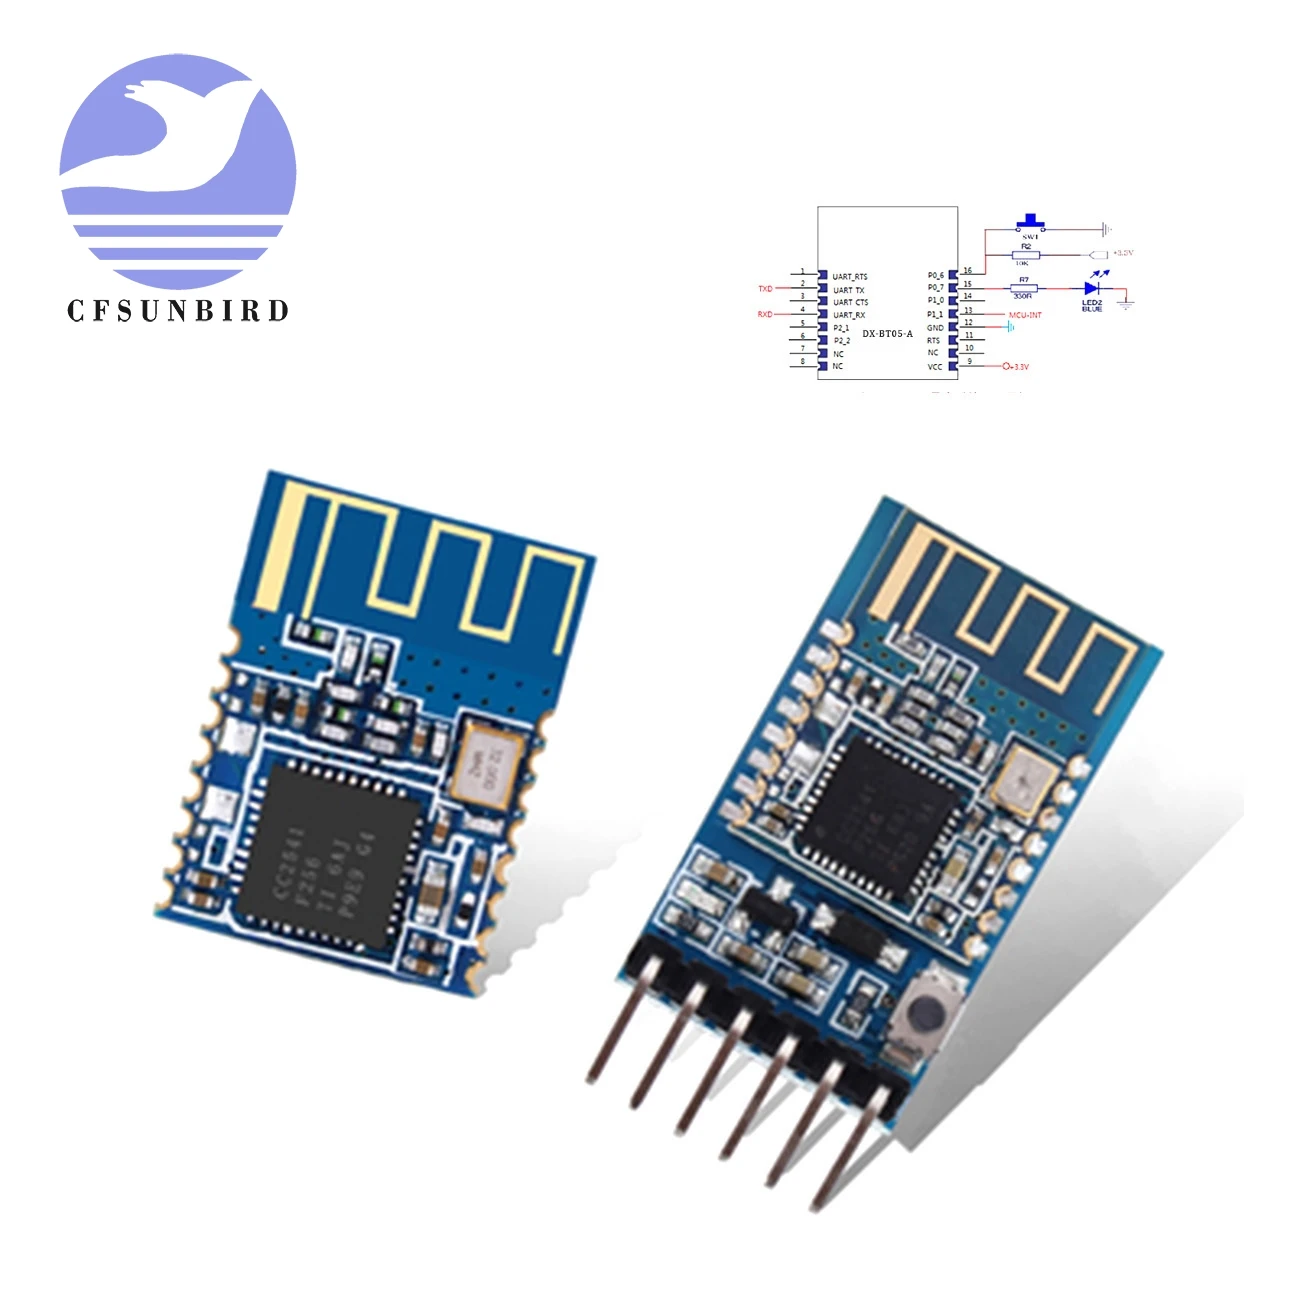 

BT05-A 4.0 Bluetooth module for arduino ble with backplane serial BLE CC2540 CC2541 Serial Wireless Module iBeacon